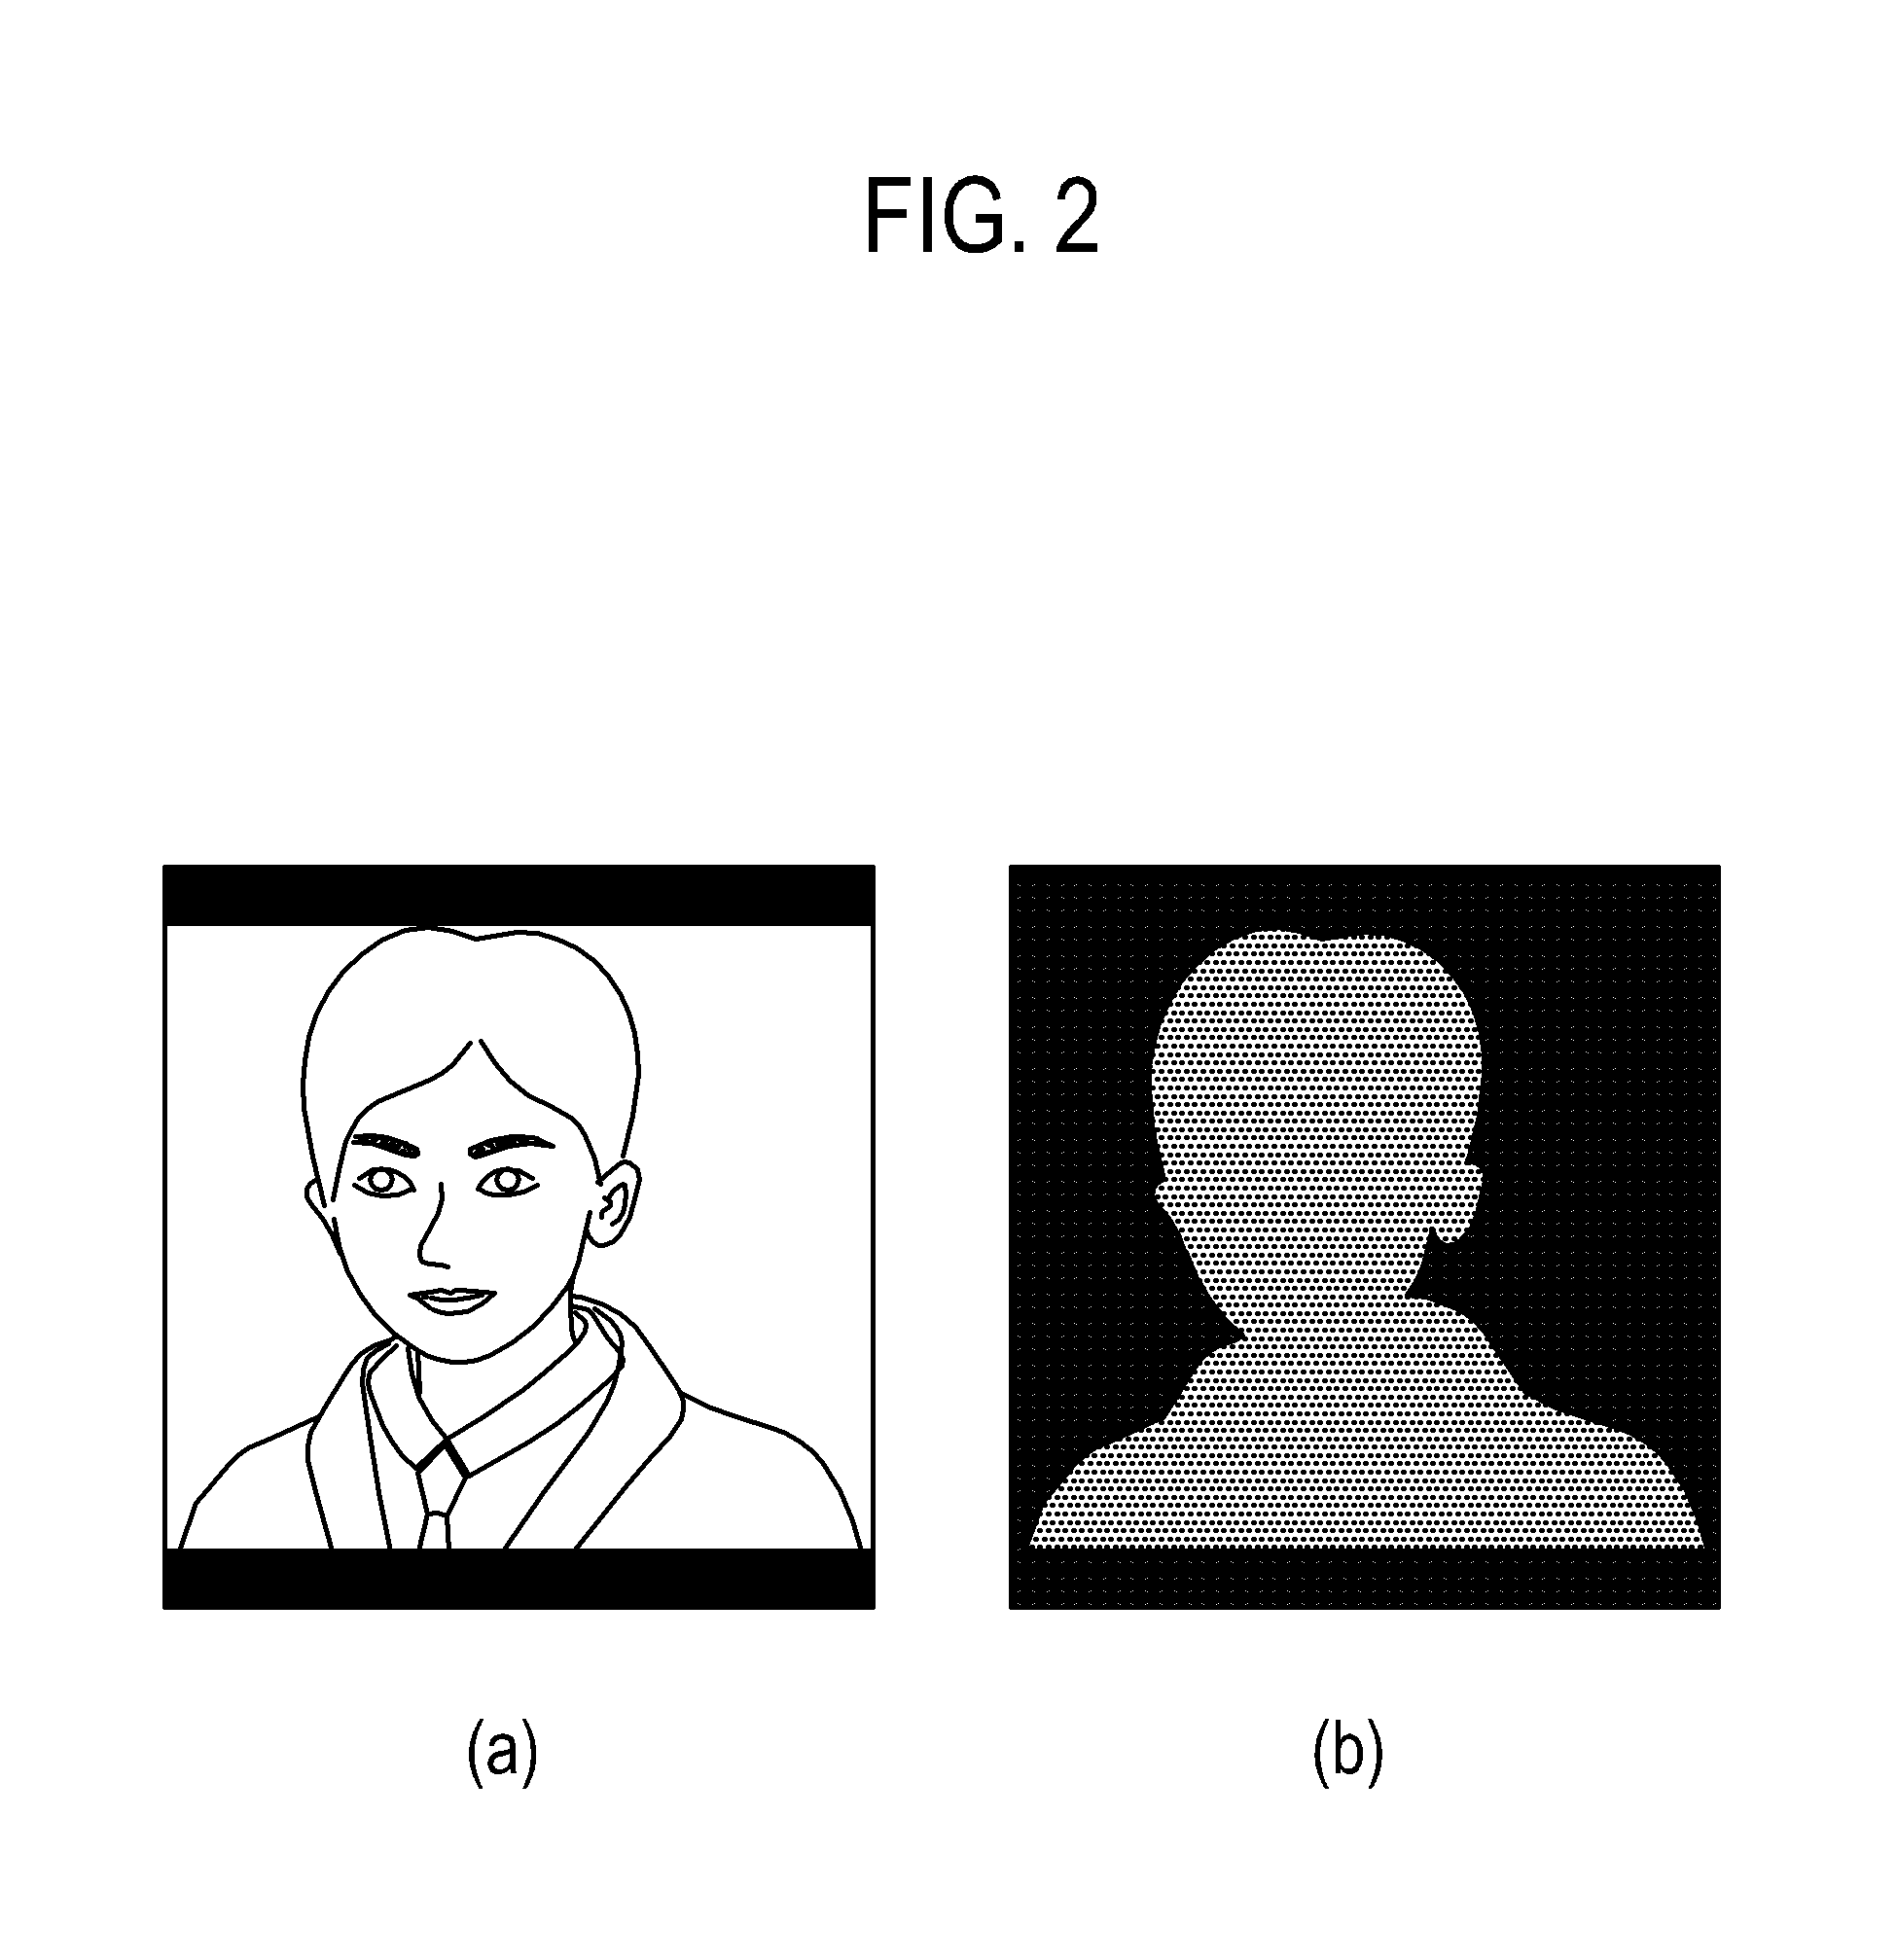 Display apparatus and method for adjusting three-dimensional effects